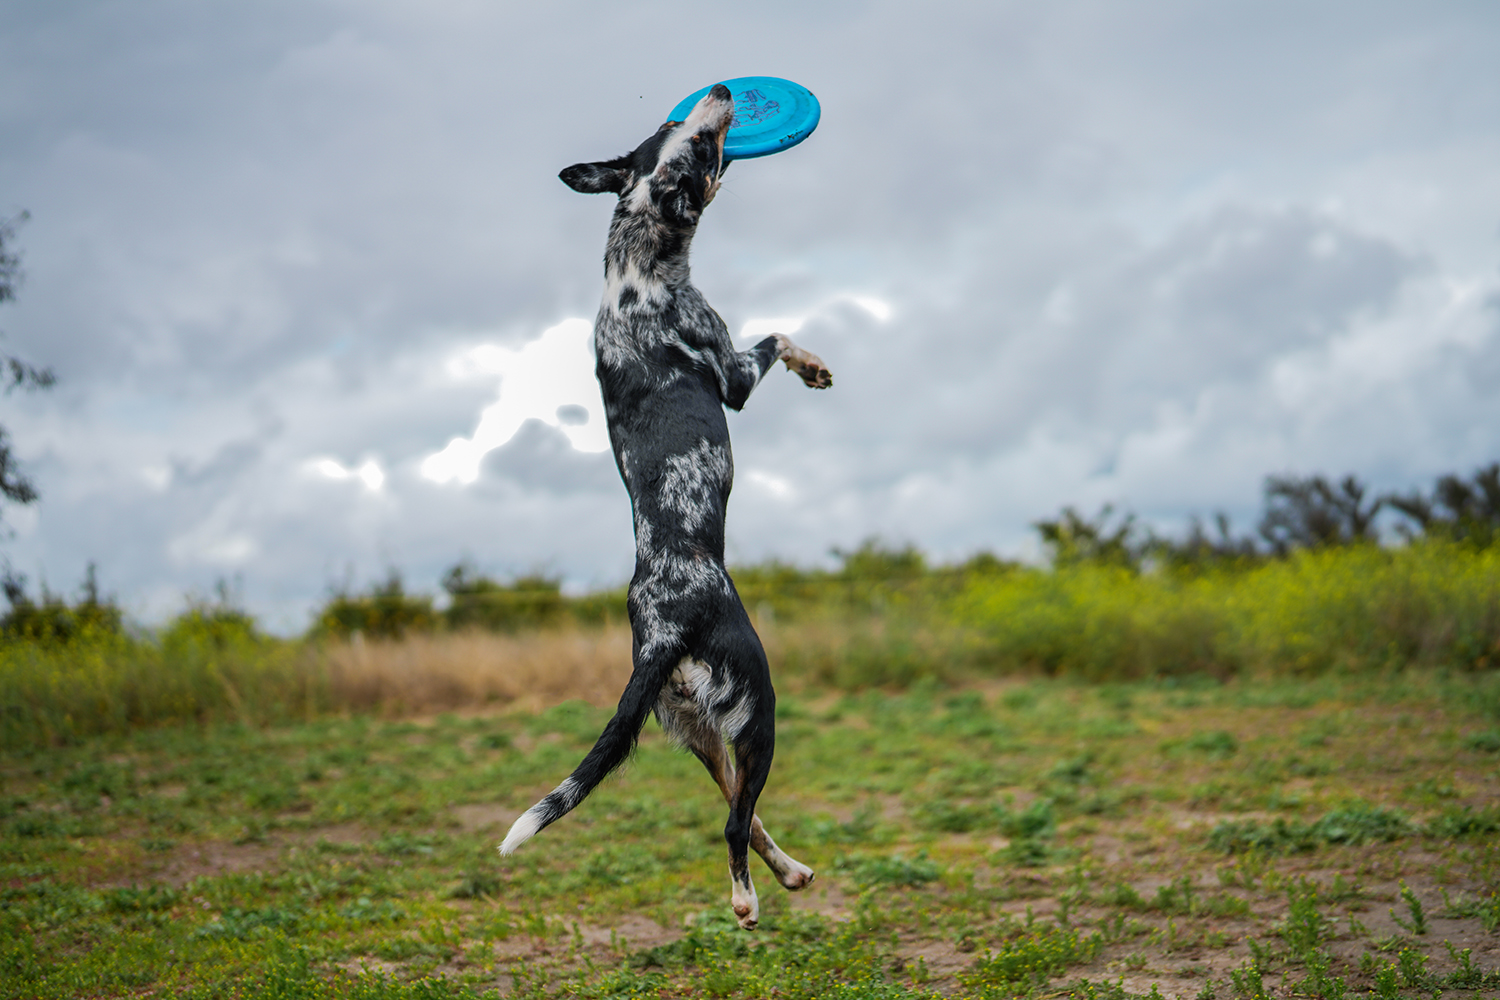 Dog jumping to catch frisbee